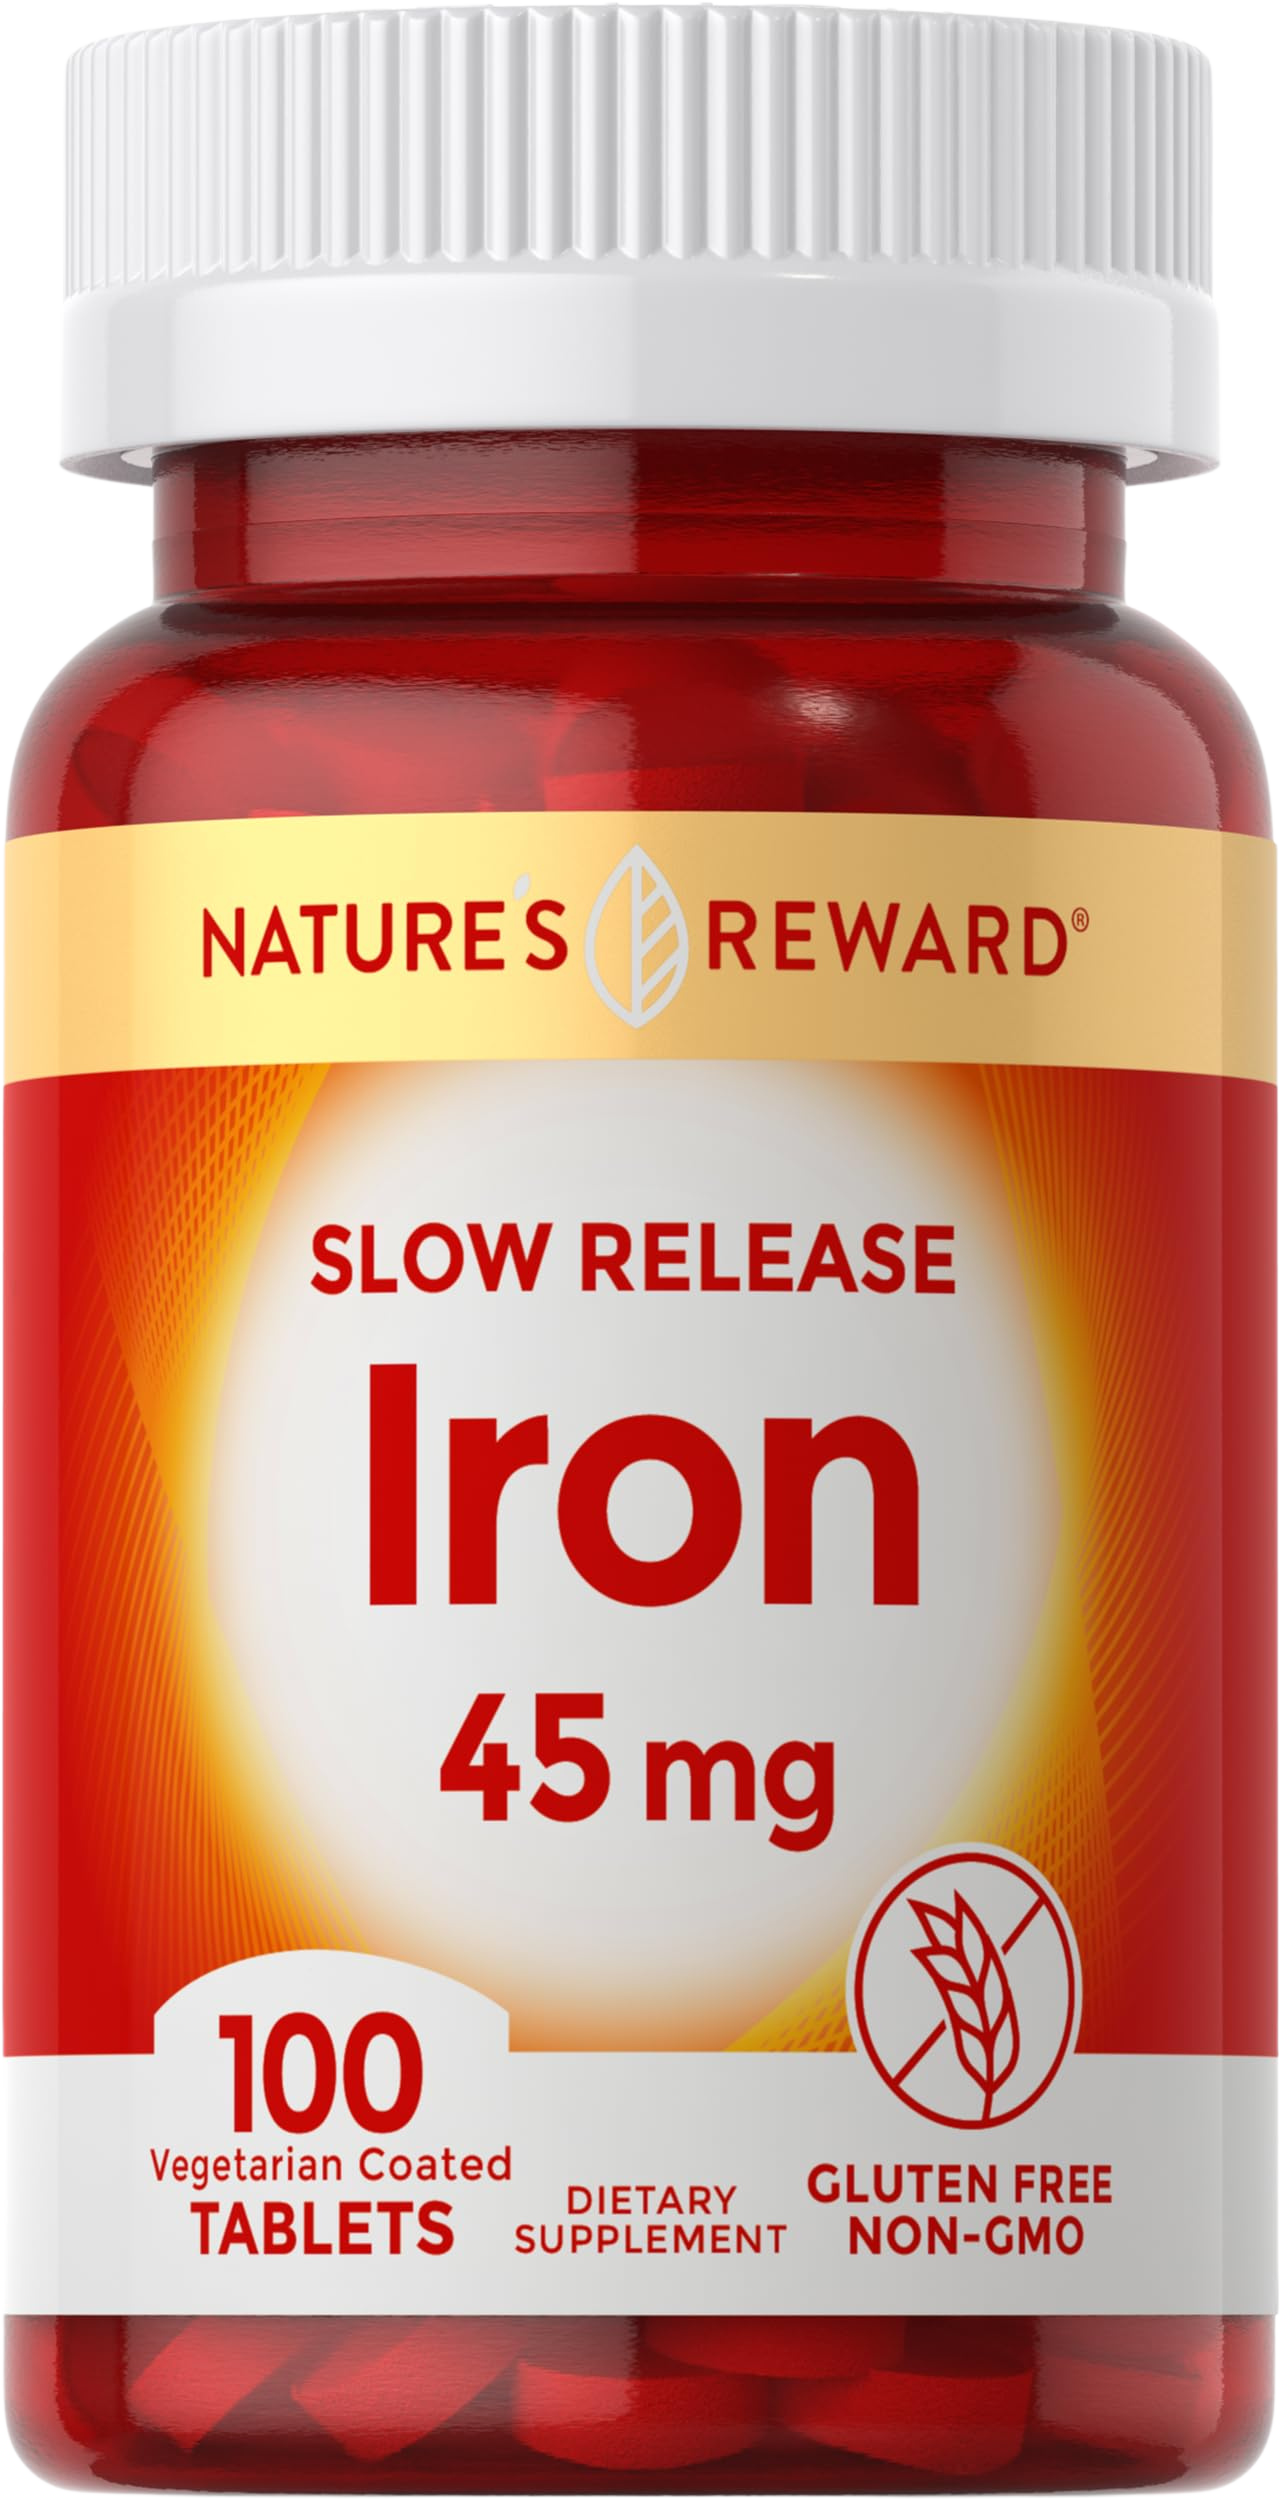 Nature's Reward Slow Release Iron - 45mg - 100 Tablets